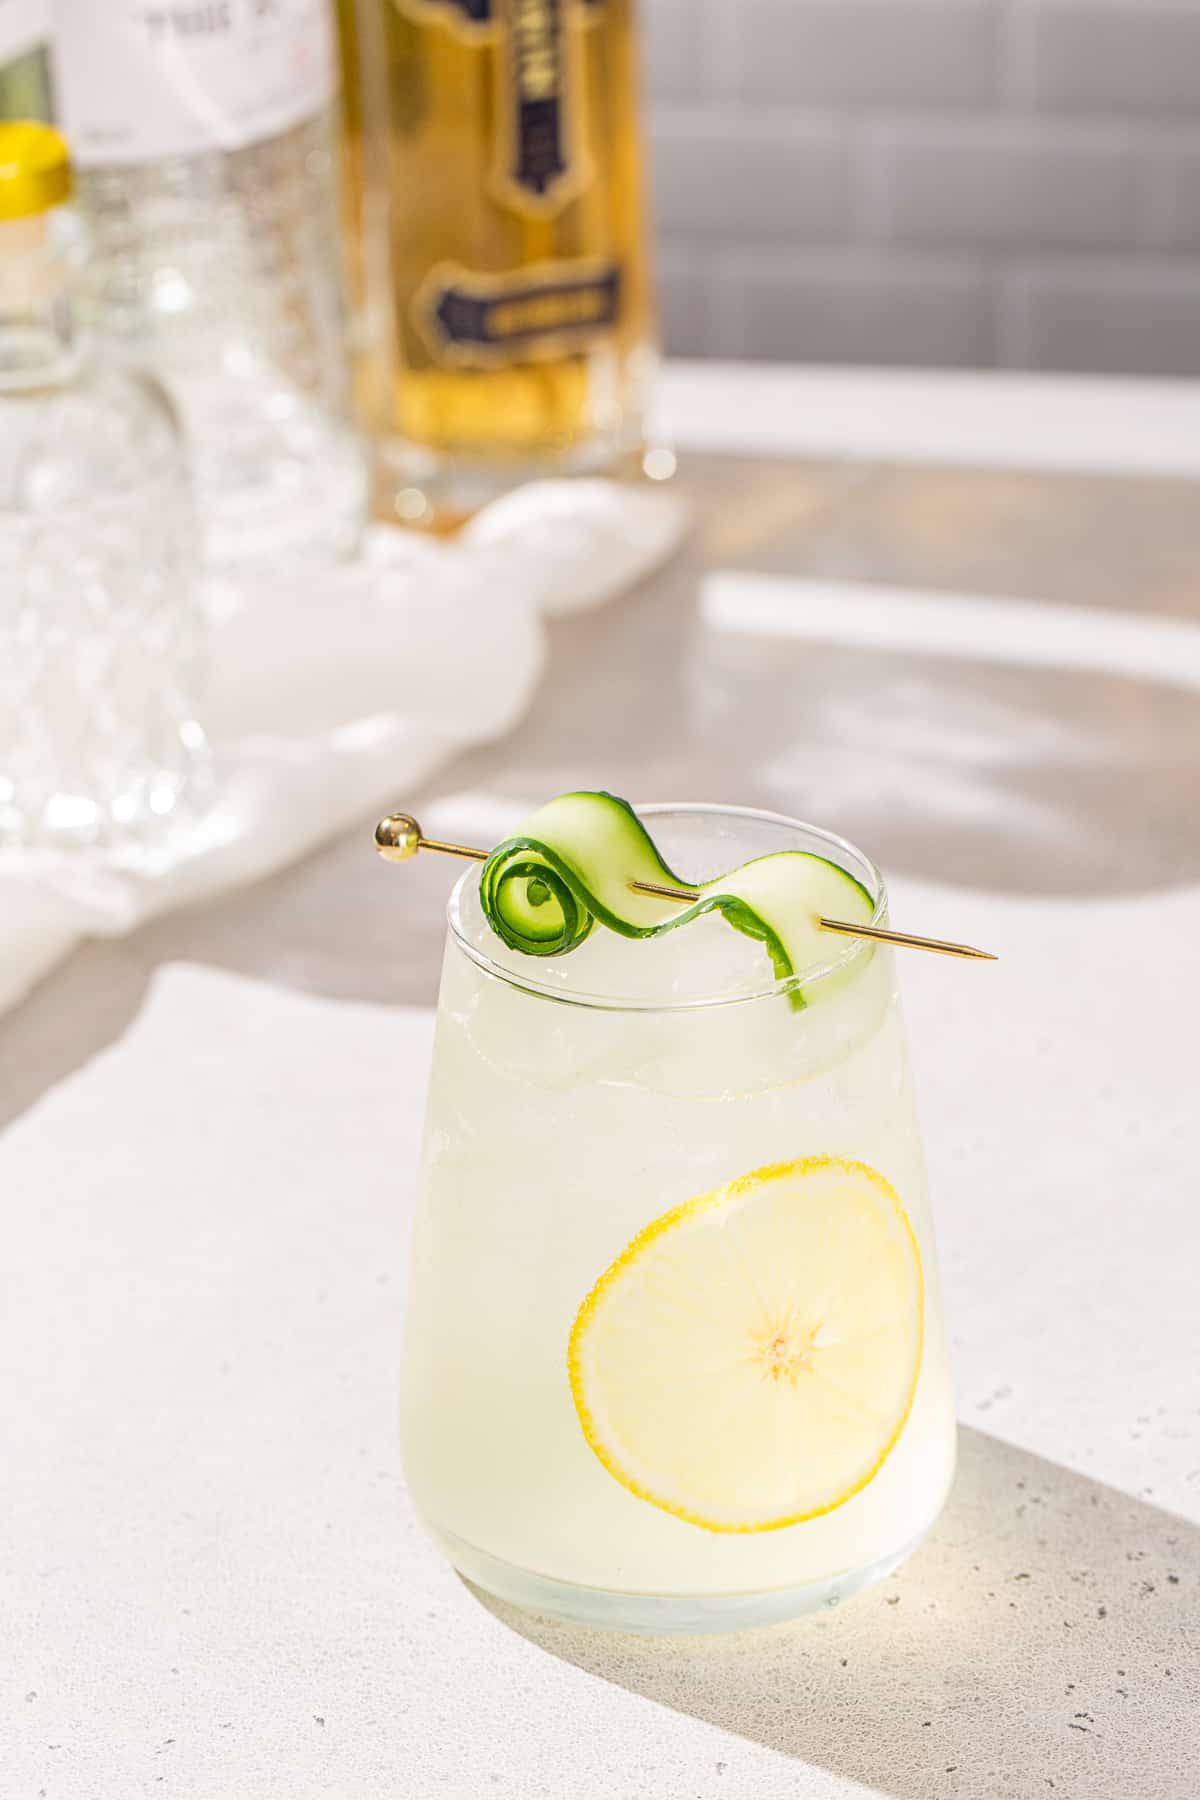 White Linen cocktail with a cucumber and lemon garnish in a stemless wine glass on a countertop. A bottle of gin and a bottle of St Germain elderflower liqueur are in the background.